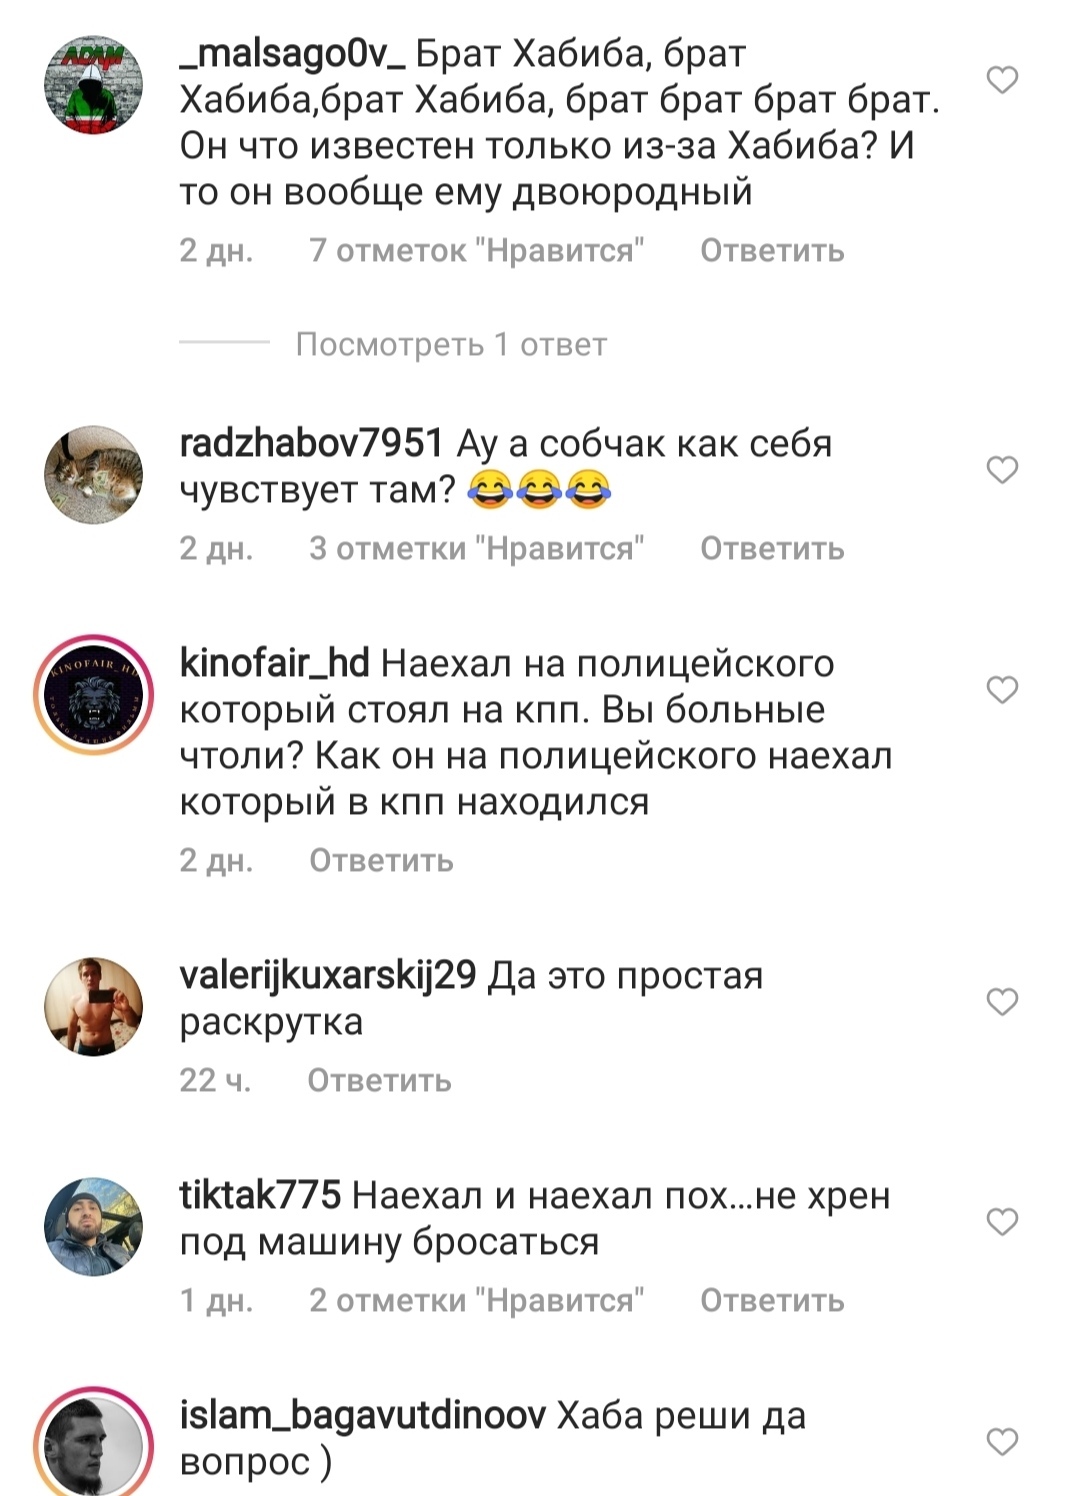 The reaction of Caucasians to the detention of Khabib Nurmagomedov's brother, Usman Nurmagomedov)) - Russia, Instagram, Comments, Caucasians, Opinion, Khabib Nurmagomedov, Usman Nurmagomedov, Hitting, Police, Auto, Road accident, Longpost